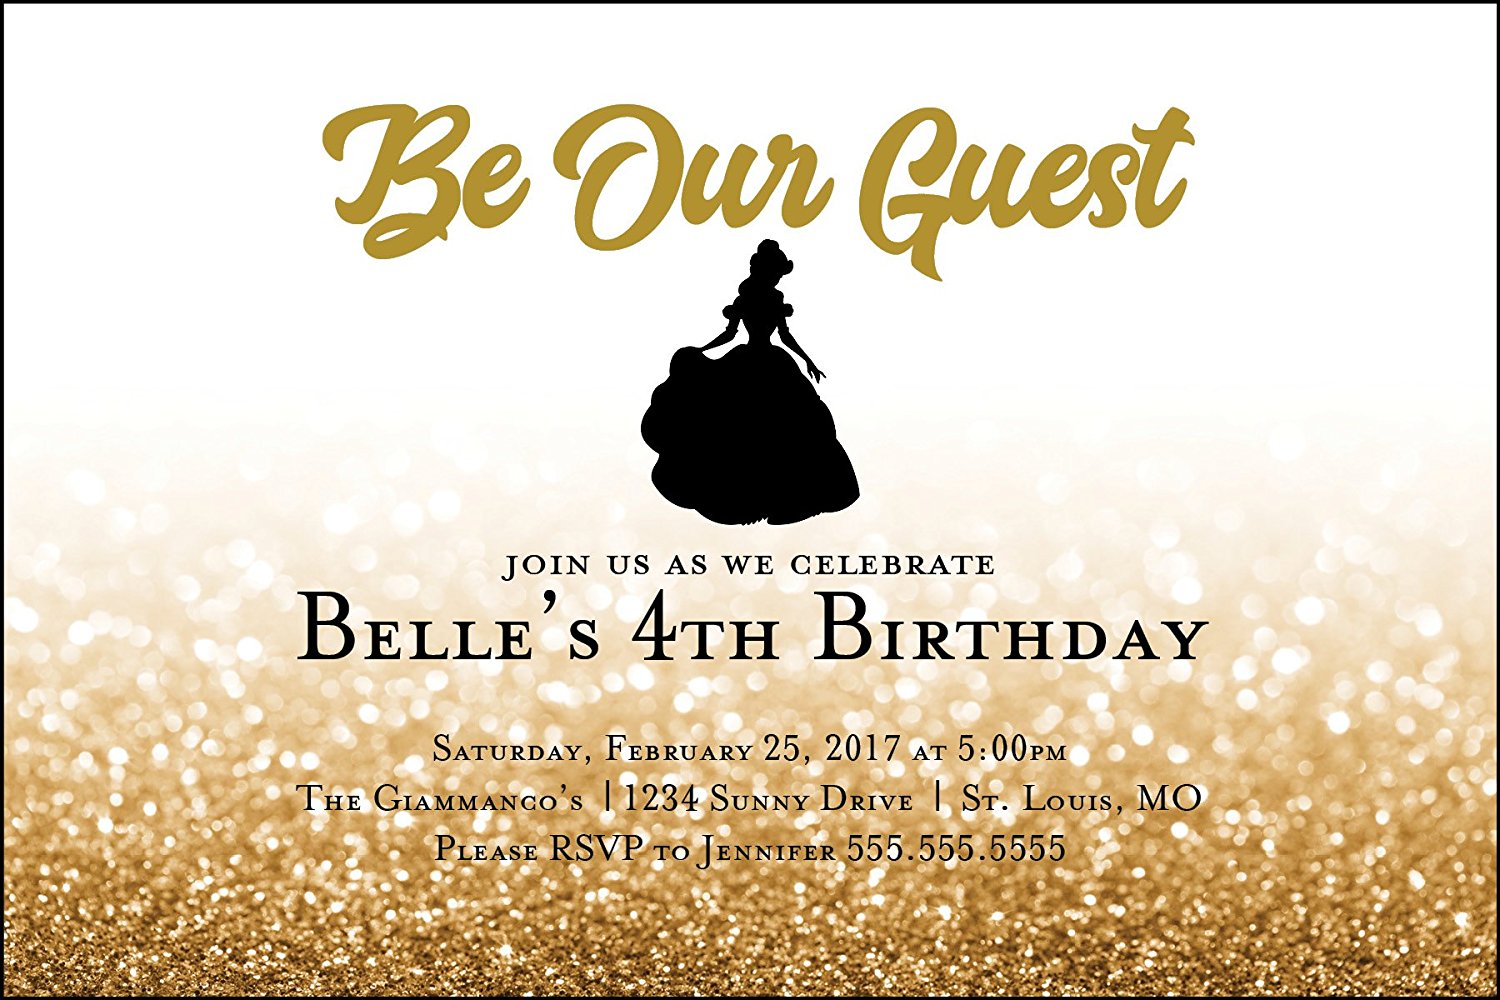 From the invitations and decorations to the cake and activities, we have tons of ideas to throw one really cute and fun Beauty and the Beast party!